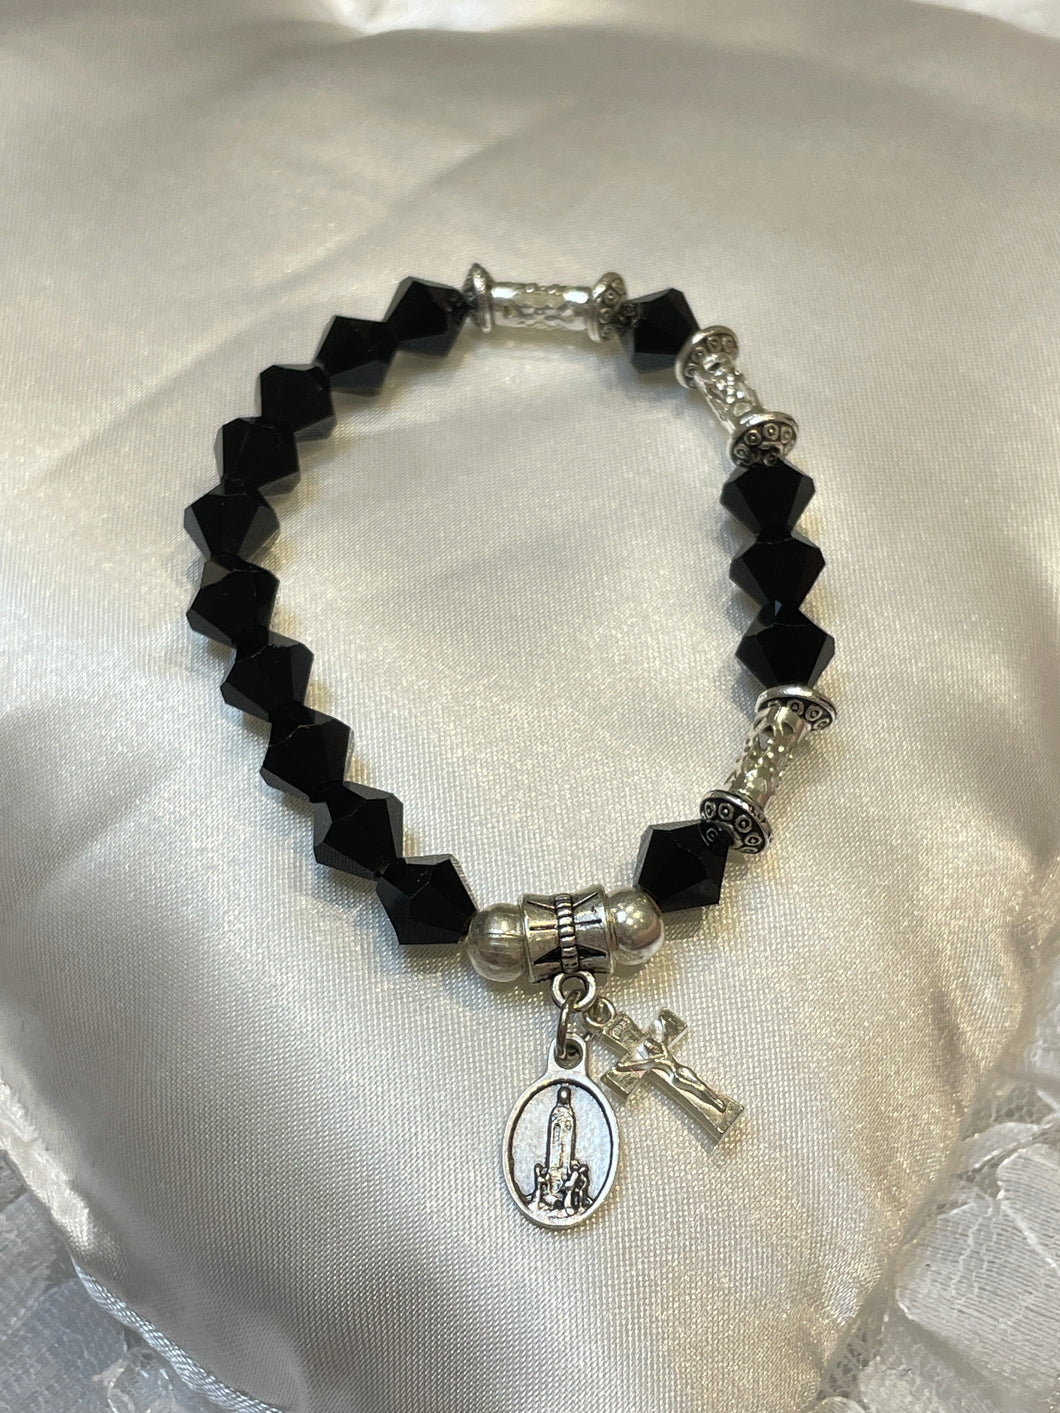 Black Crystal Rosary Bracelet with Our Lady of Fatima and Crucifix Charms